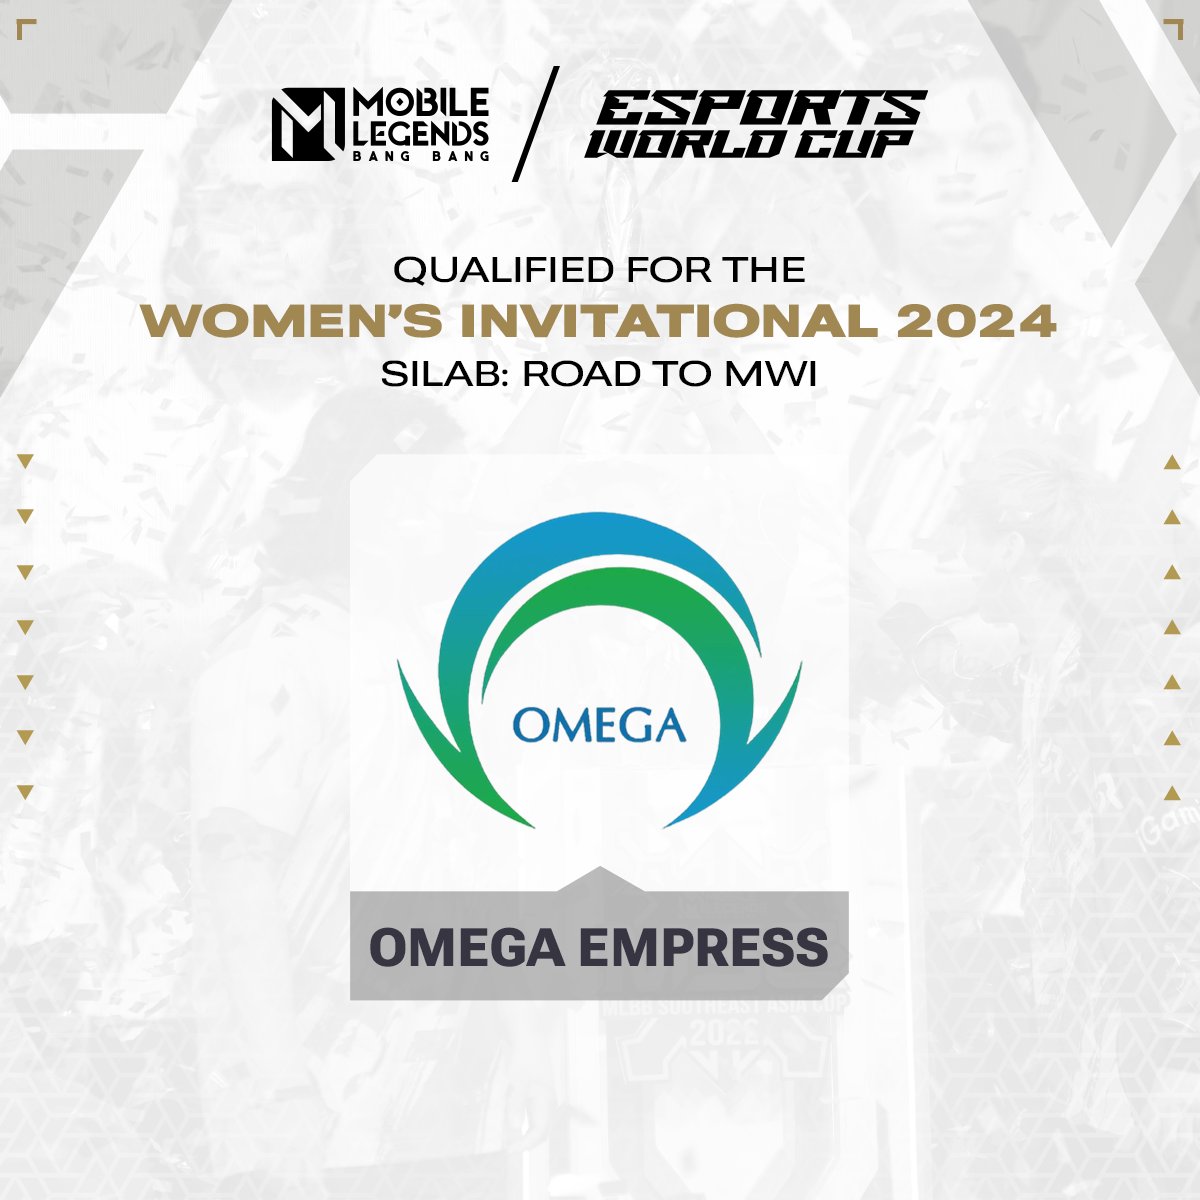 Congratulations to @OmegaEsportsPH for qualifying to the #MLBB Women's Invitational 2024 at the #EsportsWorldCup 👏👏 See you in Riyadh 🤩